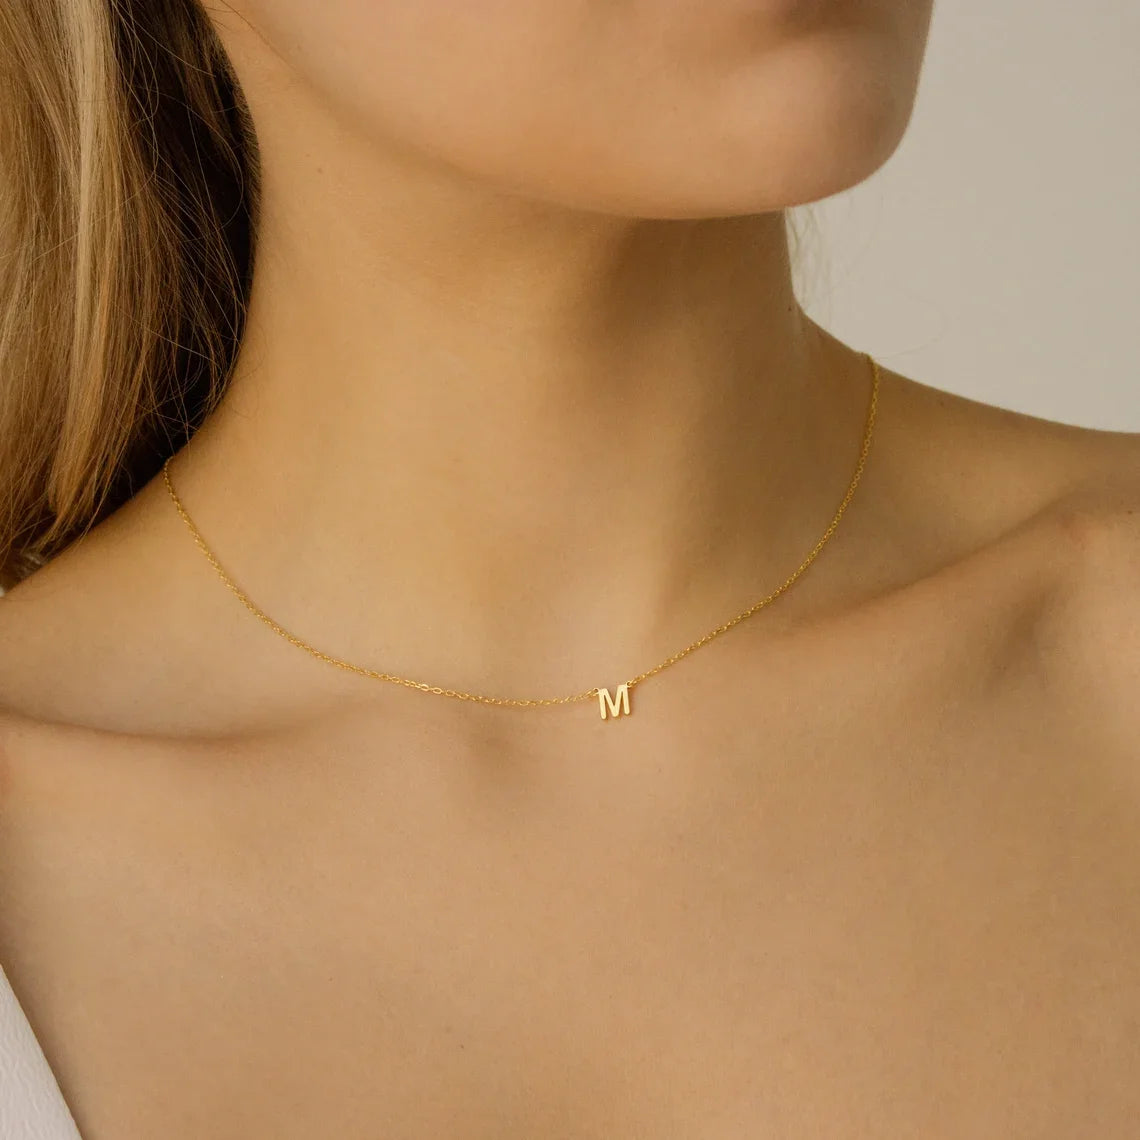 Necklace with your initial